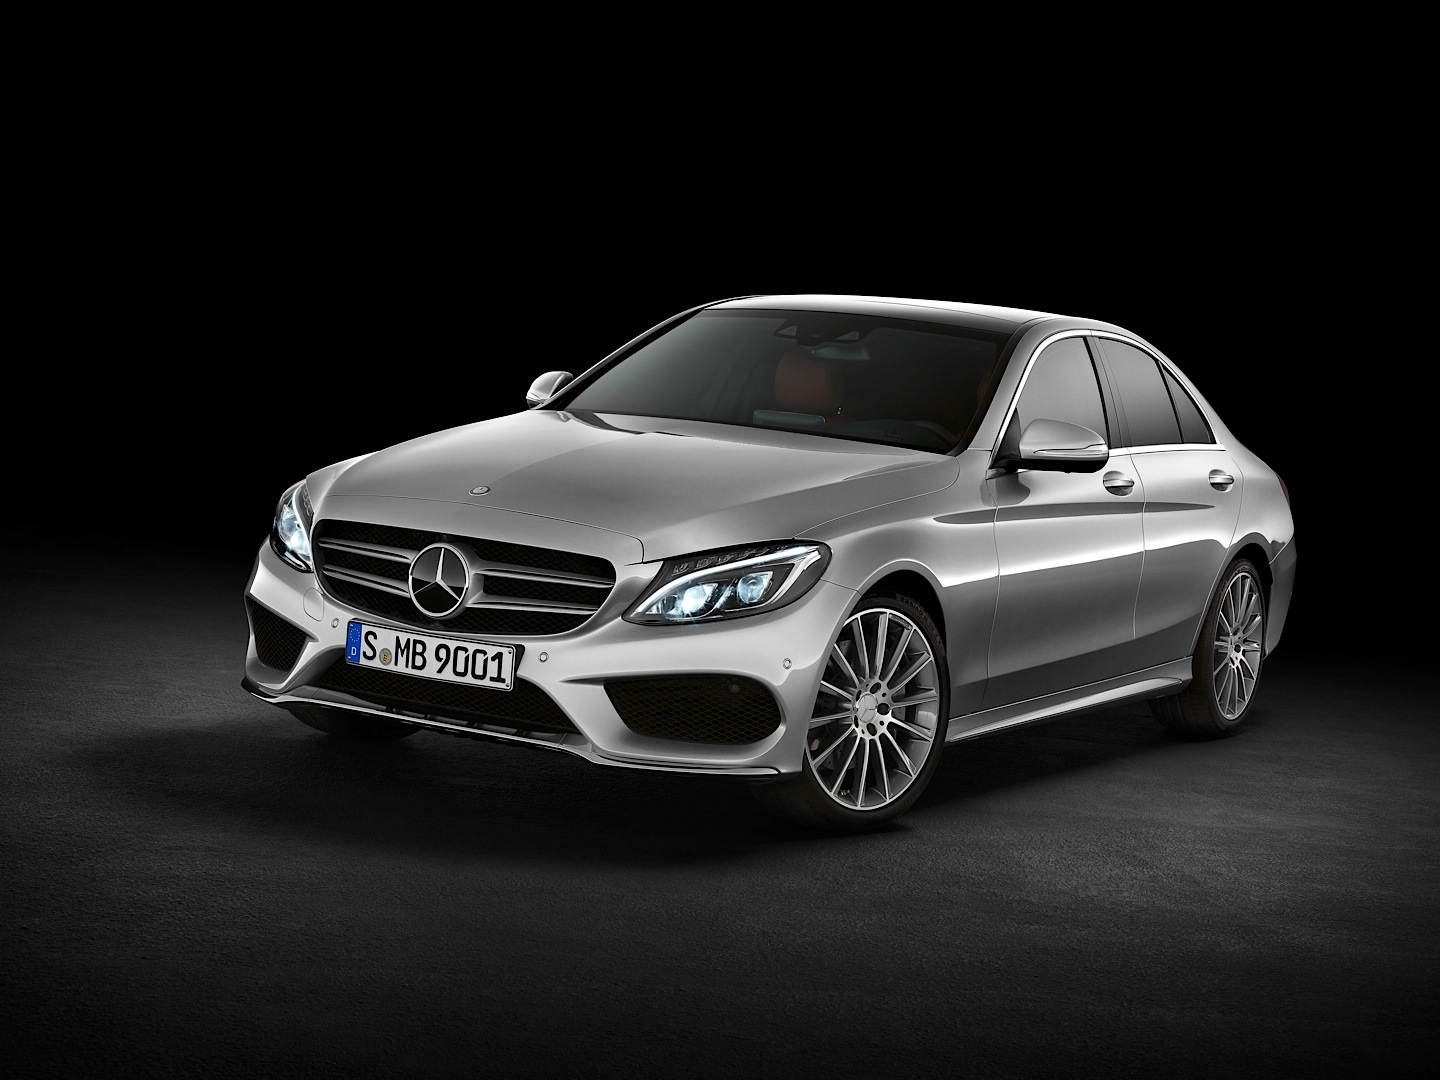 check-out-the-first-official-footage-with-the-new-c-class-w205-video-1080p-21